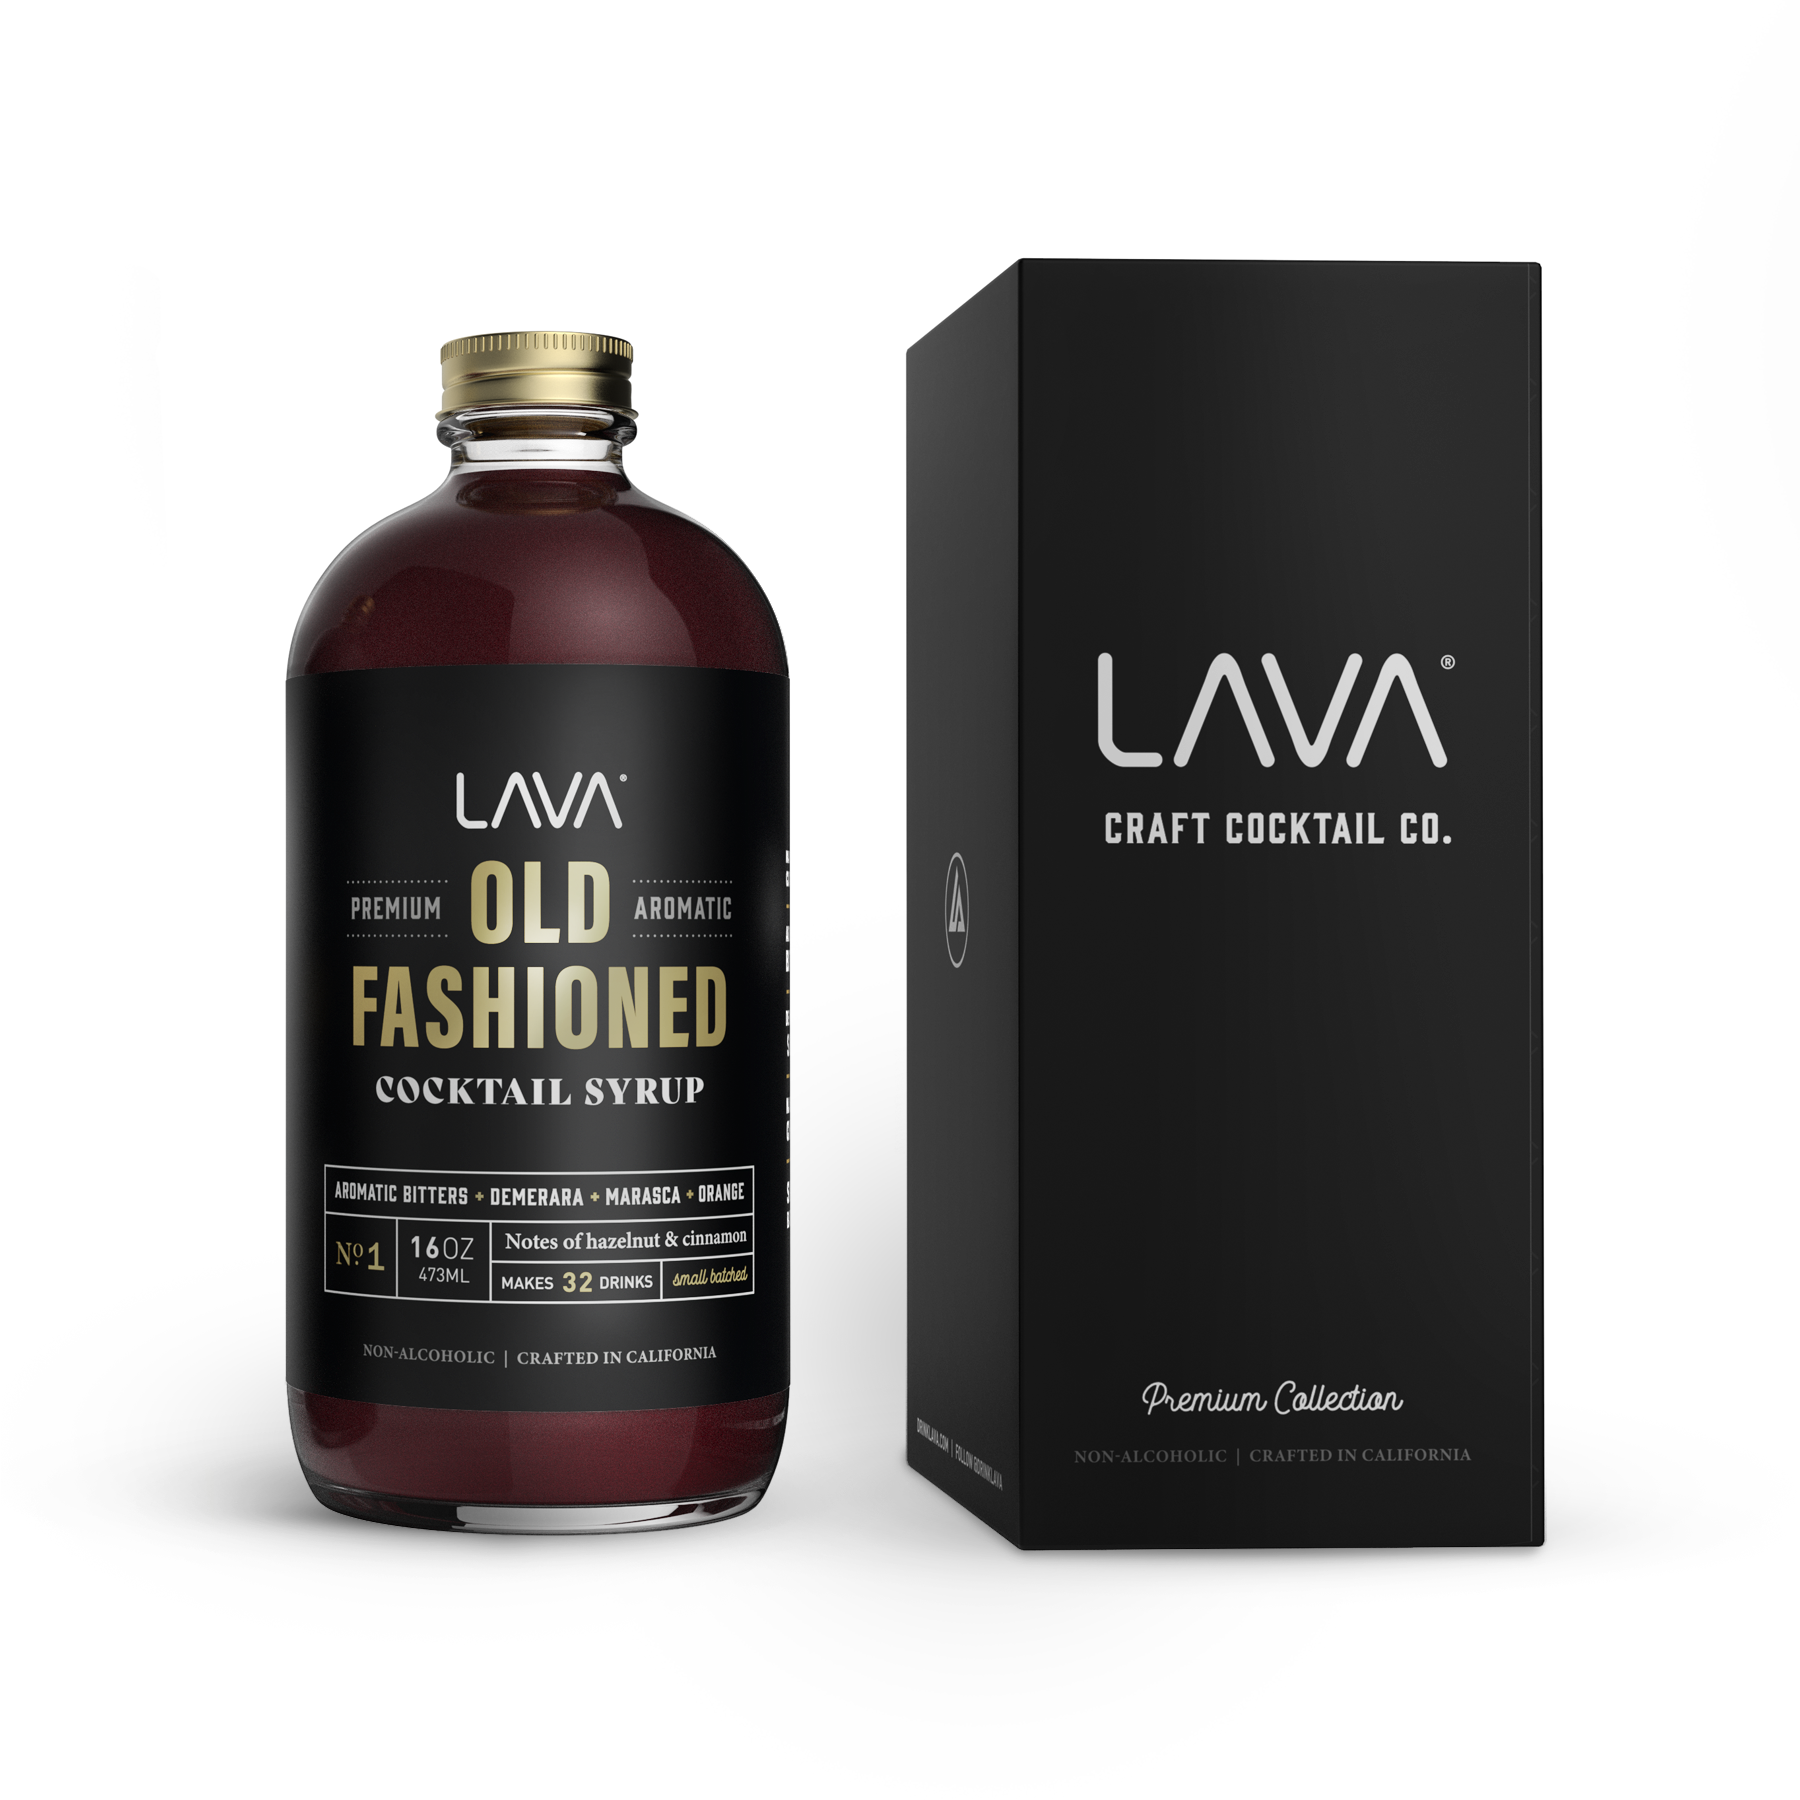 Lava Premium Aromatic Old Fashioned Cocktail Mixer 16oz, Makes 32 Cocktails, Cocktail Syrup Made with Aromatic Bitters, Demerara, Marasca Cherry, Ora